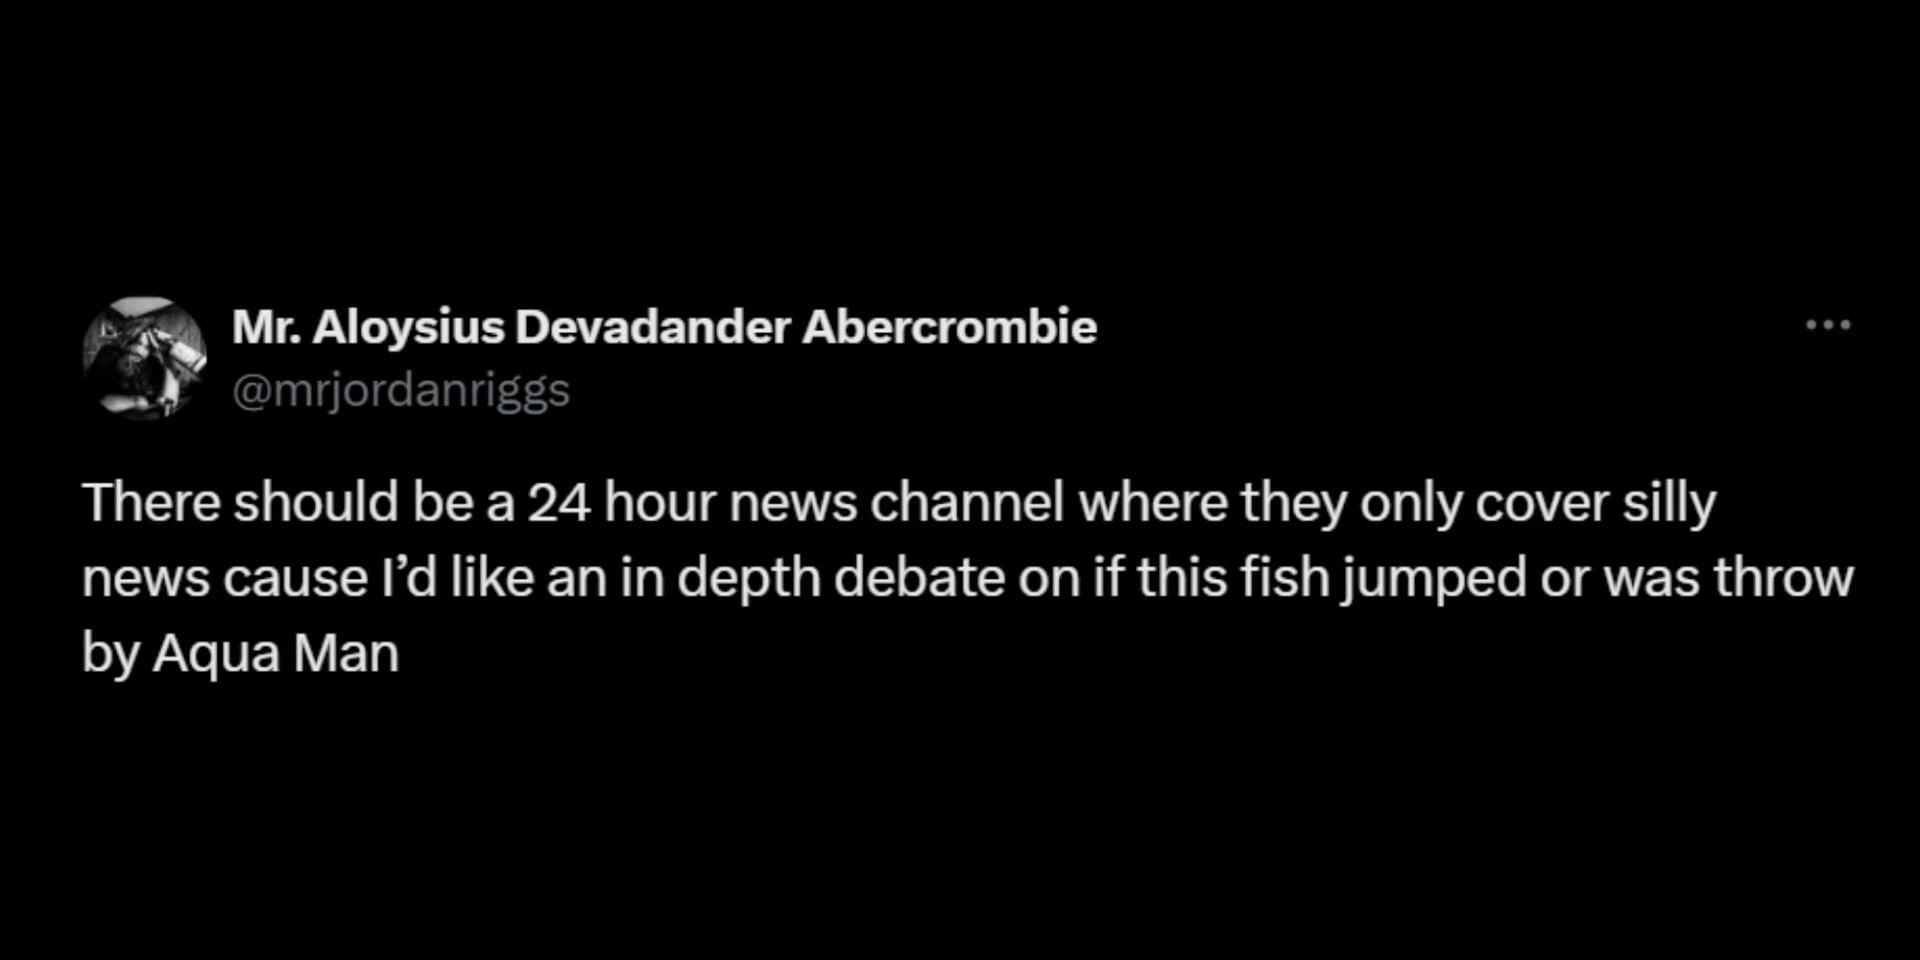 Viral video of weatherman getting hit by a fish prompts hilarious reactions. (Image via X/@rawsalerts)